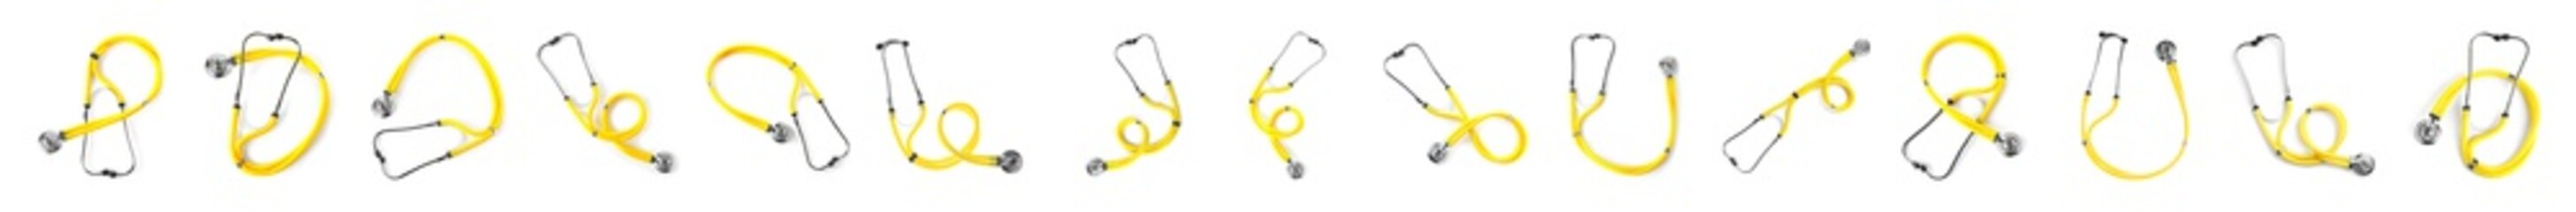 Set of yellow stethoscopes on white background, top view. Medical device